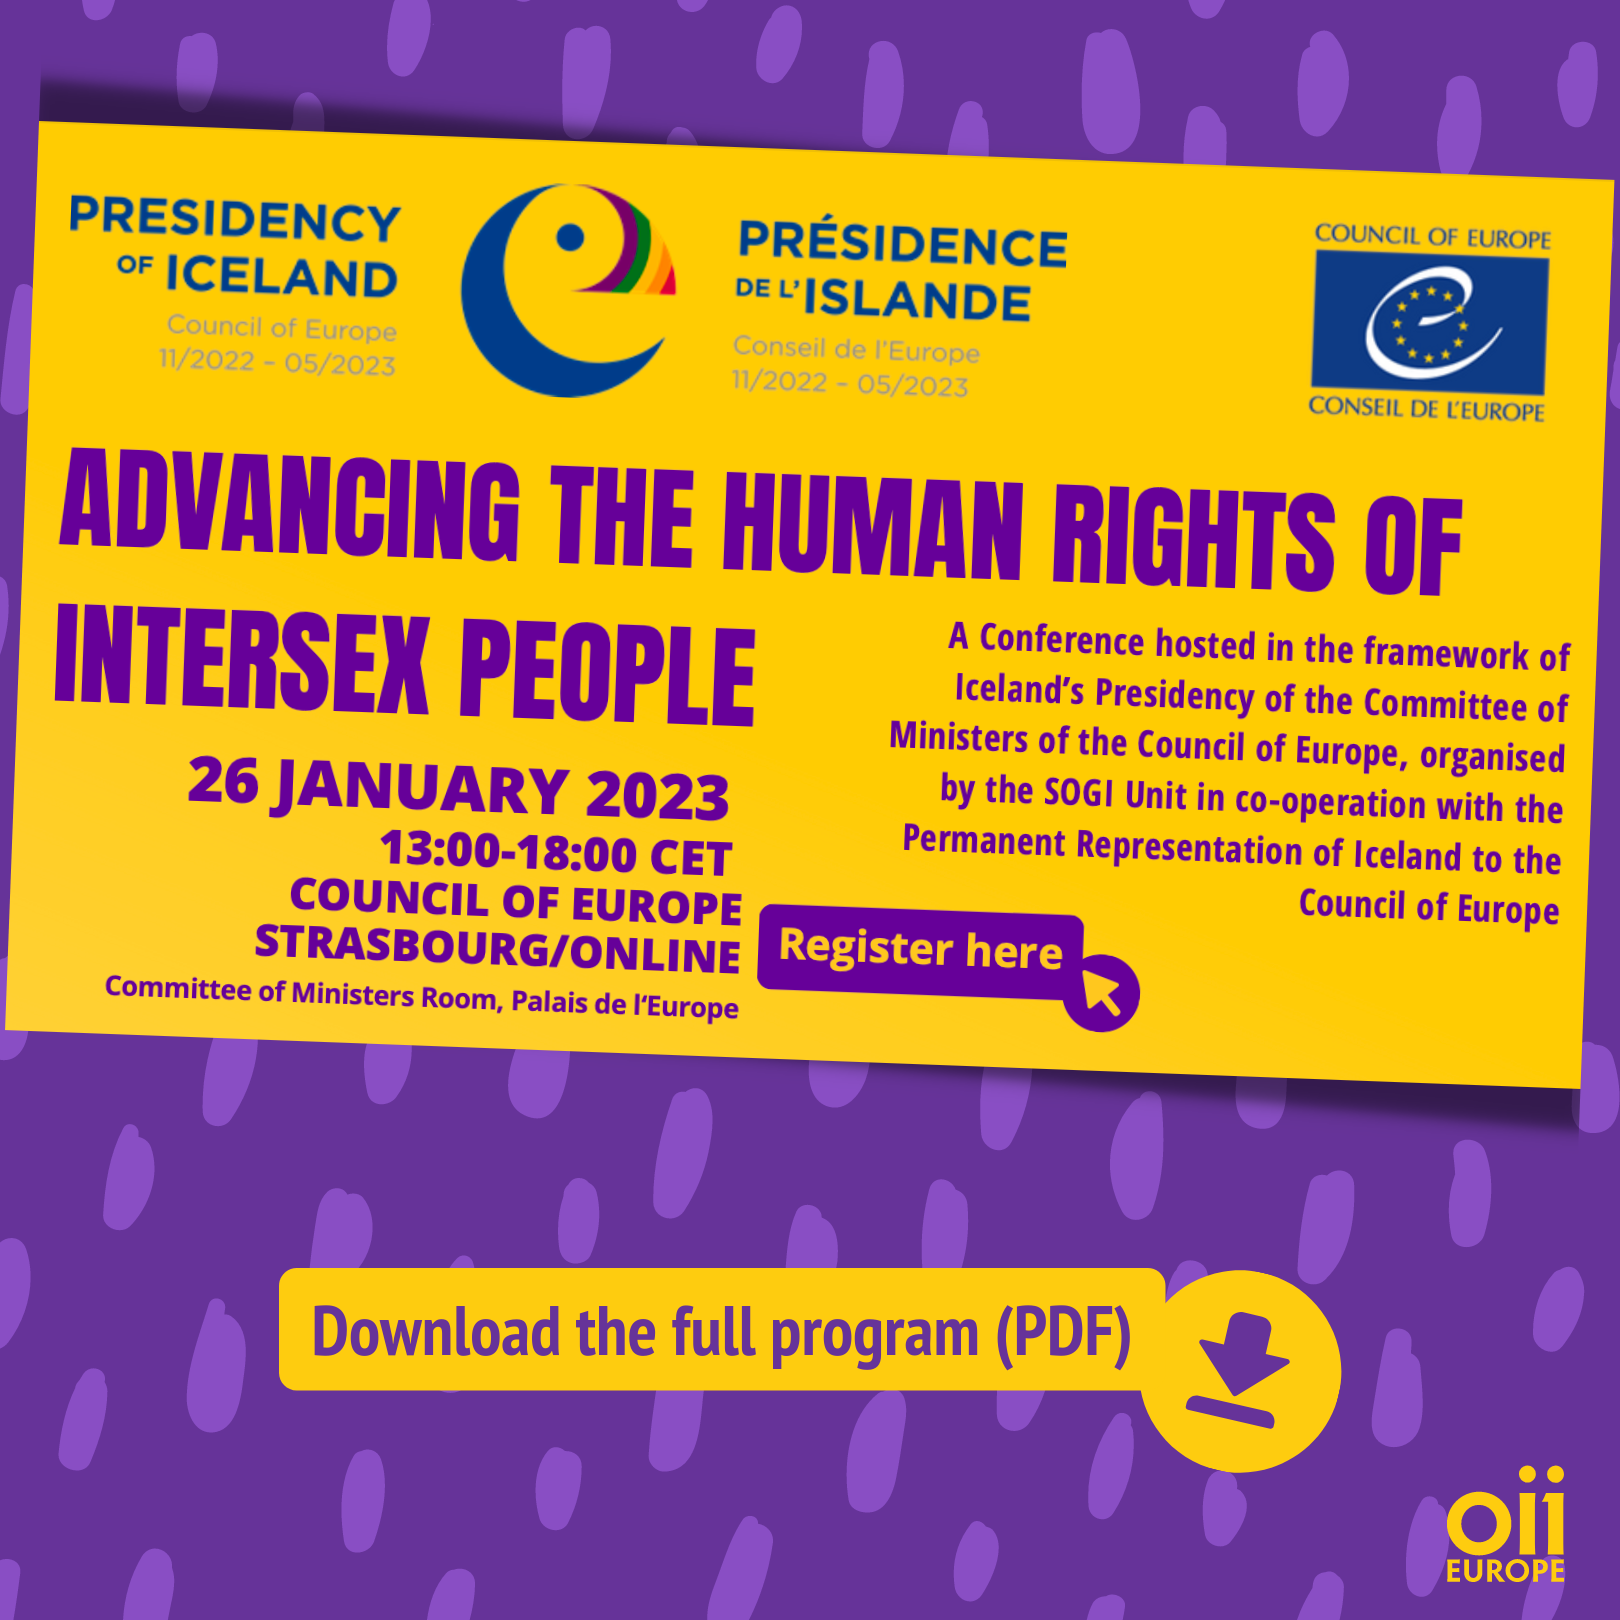 Advancing the Human Rights of Intersex People Conference – Council of Europe